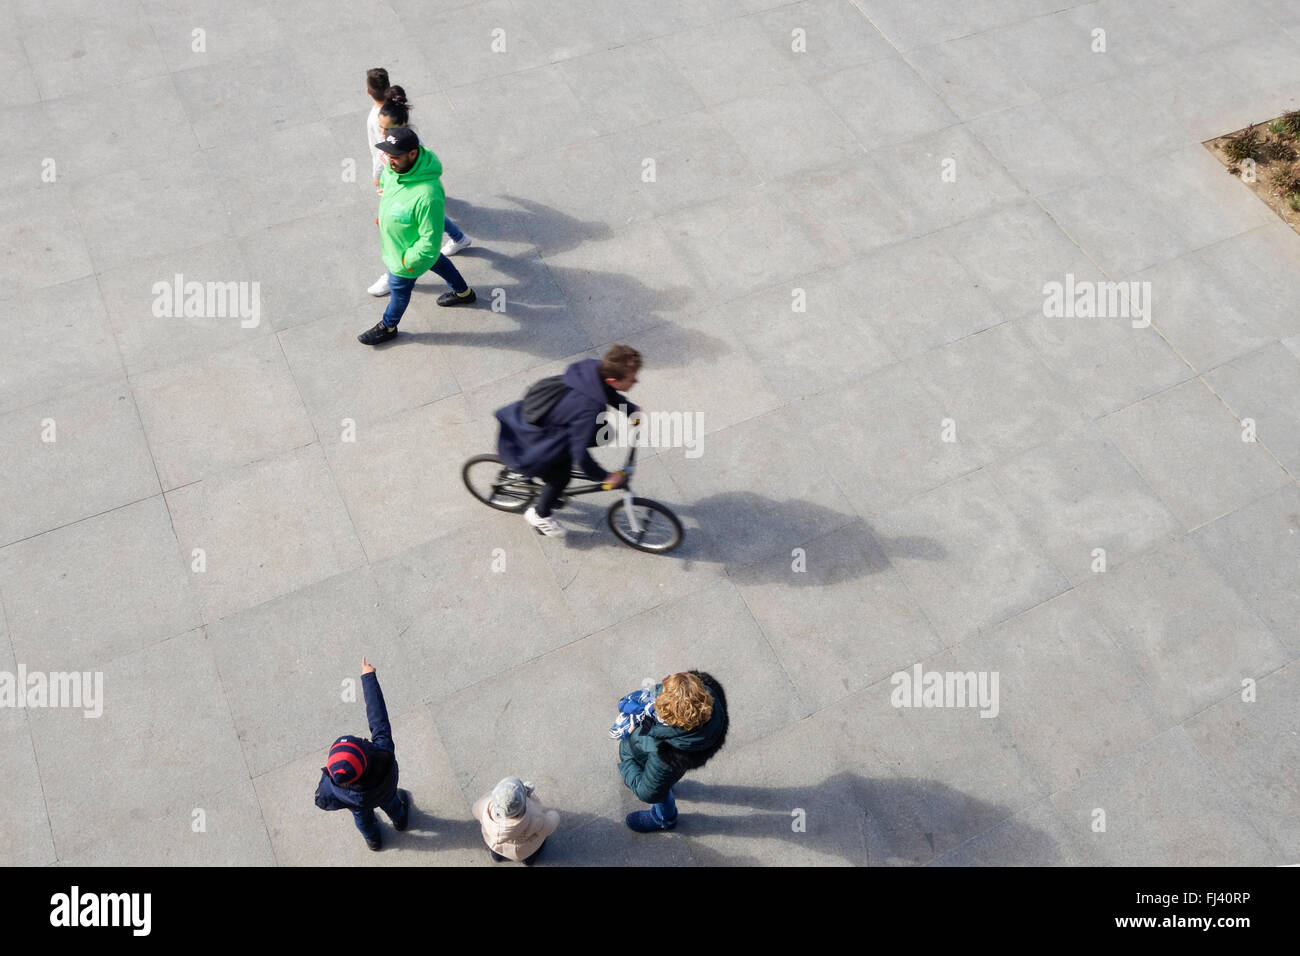 People and cycler on square, pedestrians, walking viewed from above, high view. Stock Photo